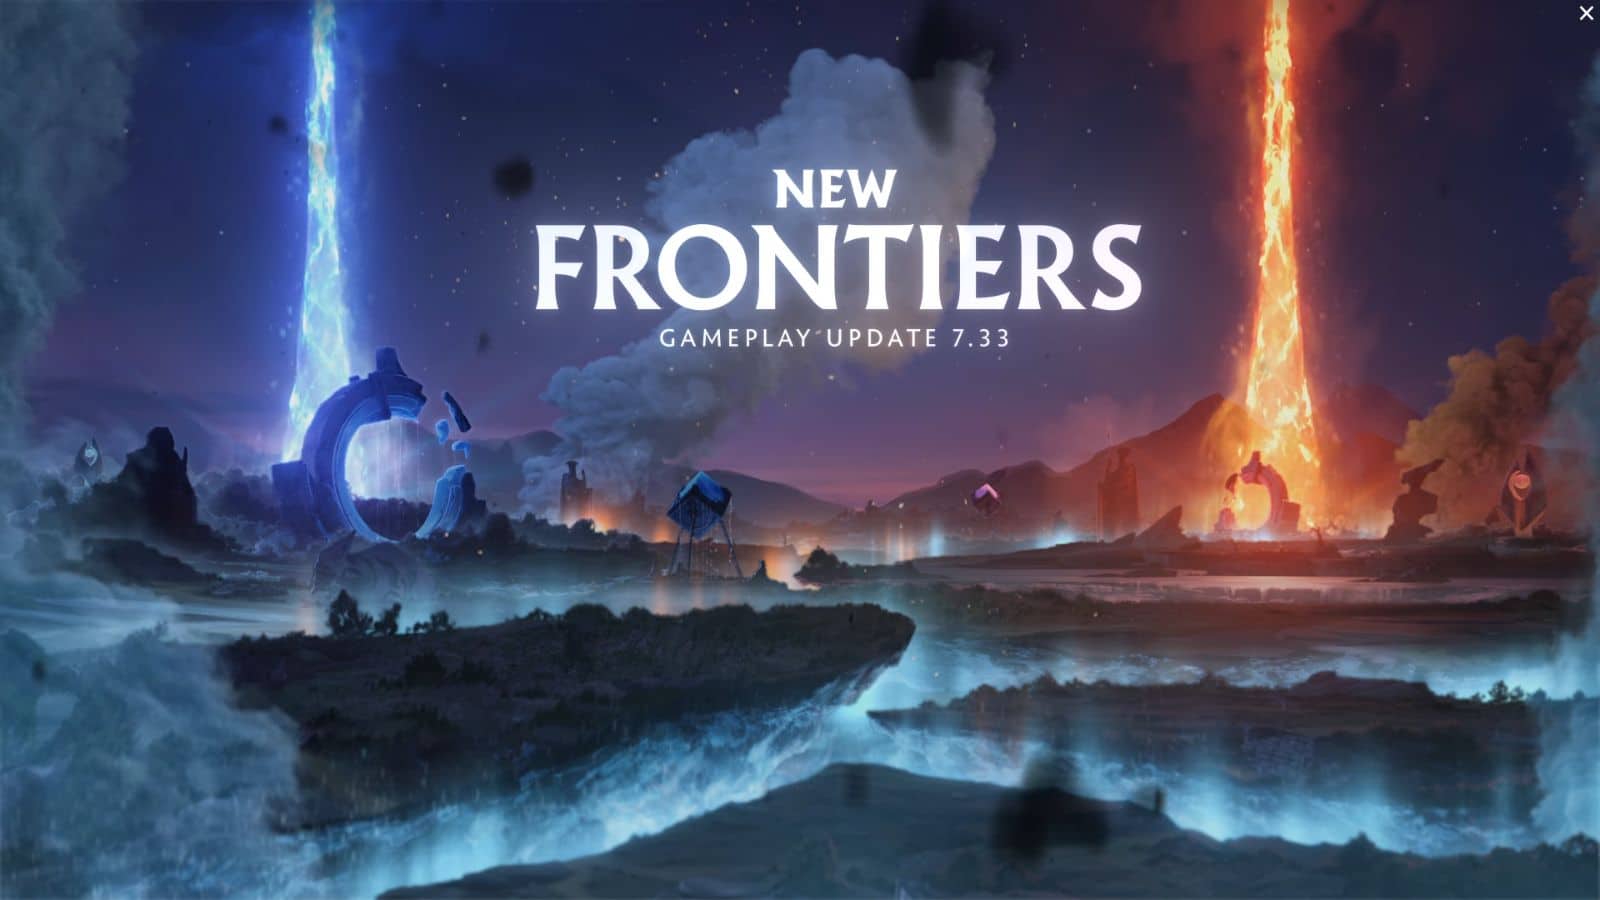 Dota 2: Patch 7.33 Item Changes – The New Frontiers Update